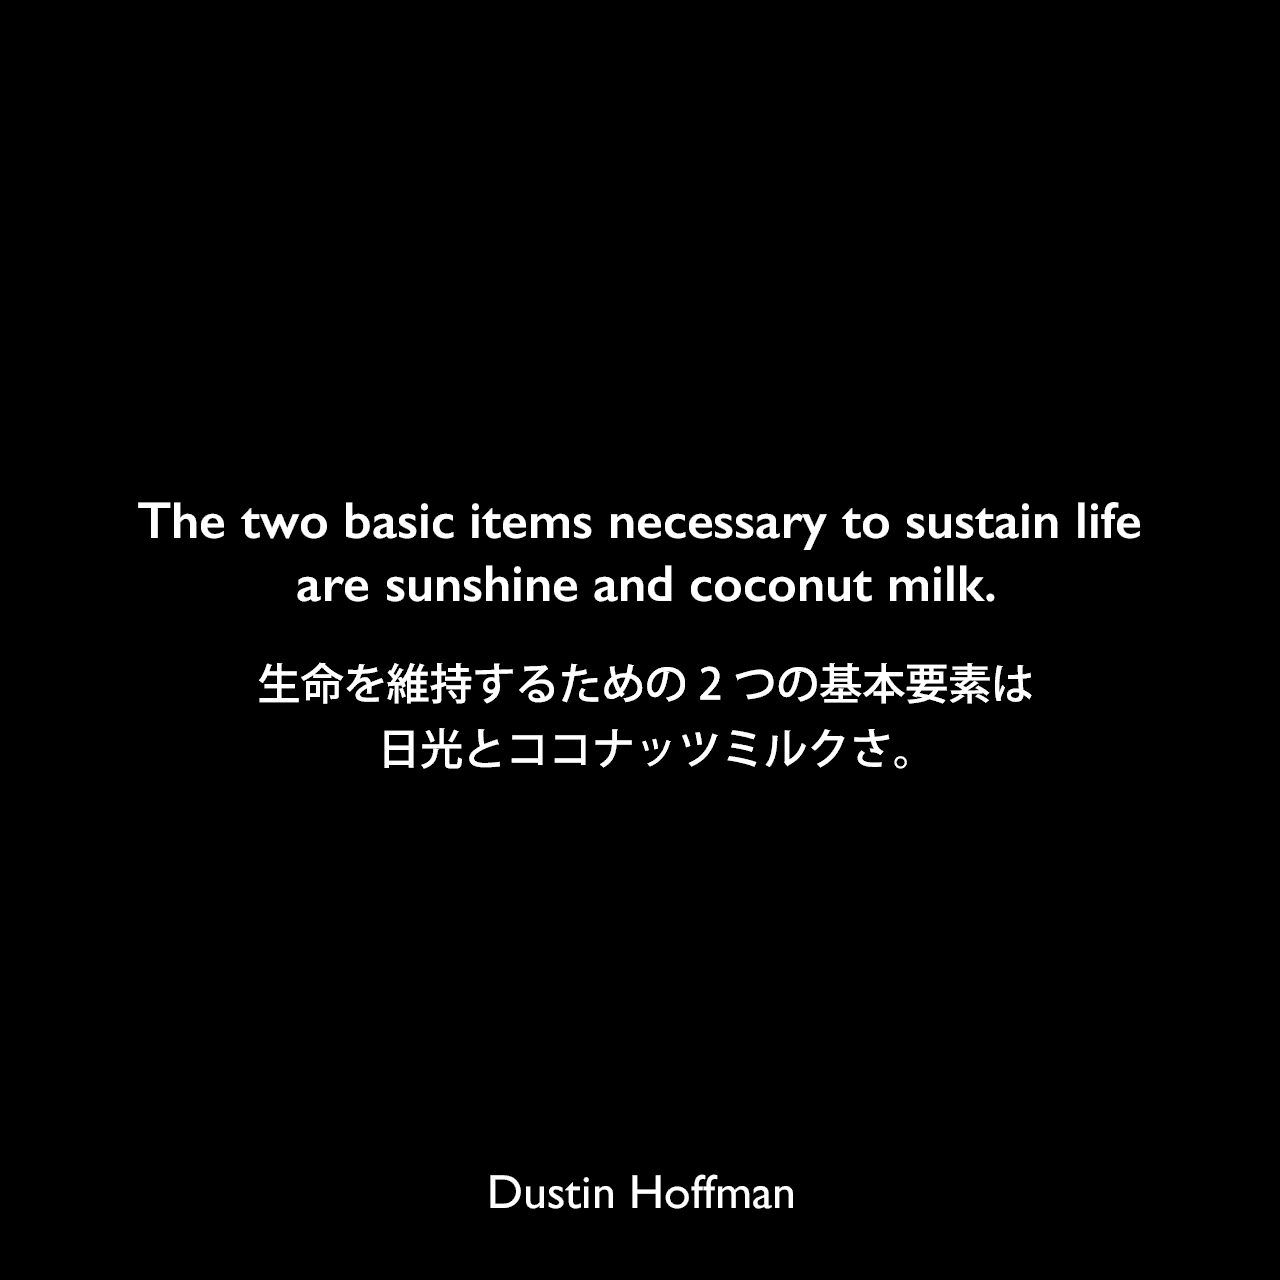 The two basic items necessary to sustain life are sunshine and coconut milk.生命を維持するための2つの基本要素は、日光とココナッツミルクさ。Dustin Hoffman